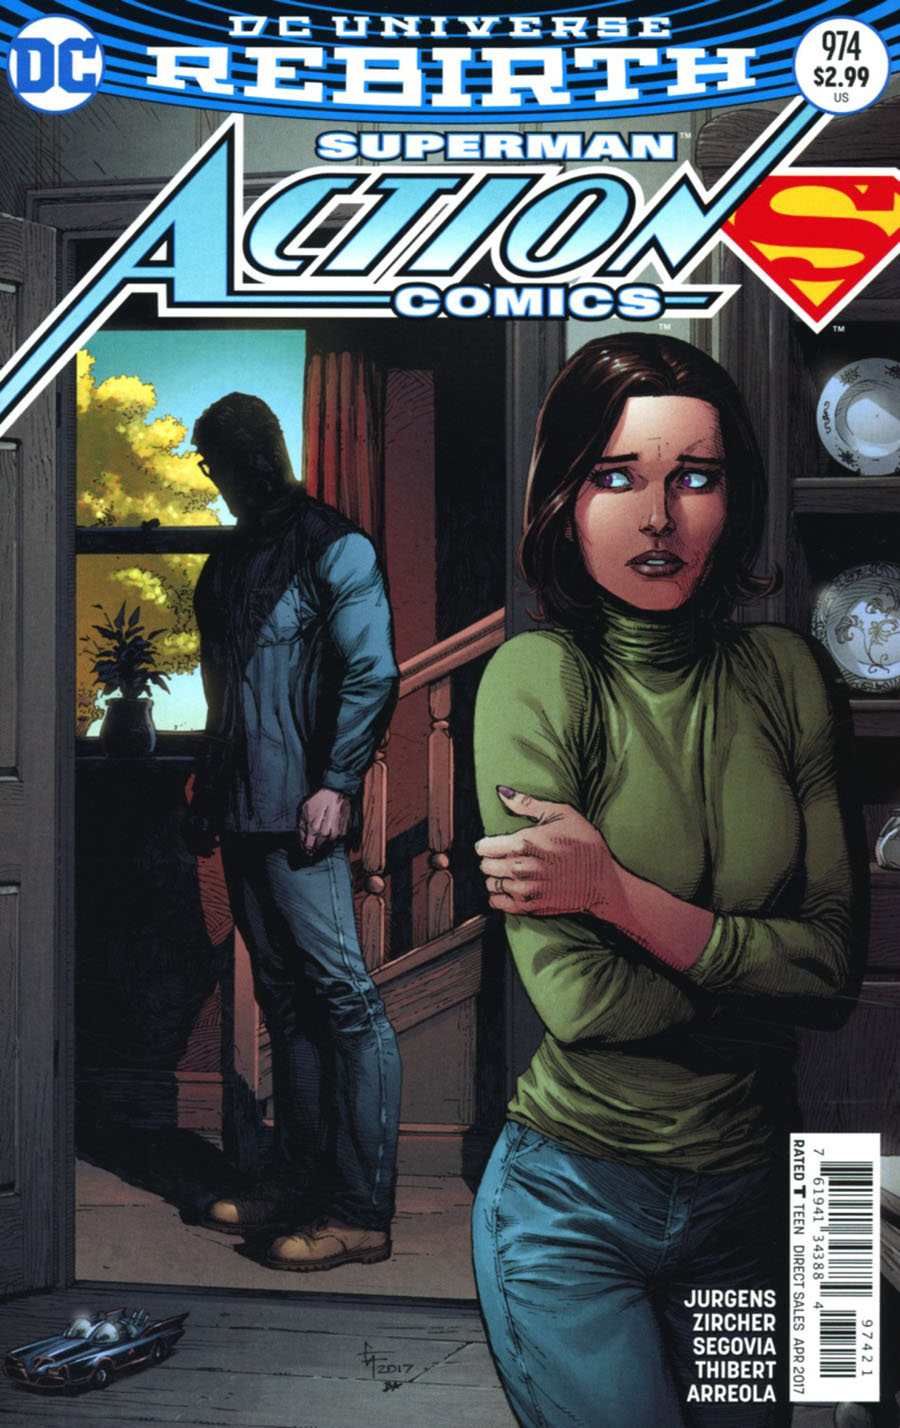 Action Comics Vol 2 #974 Cover B Variant Gary Frank Cover